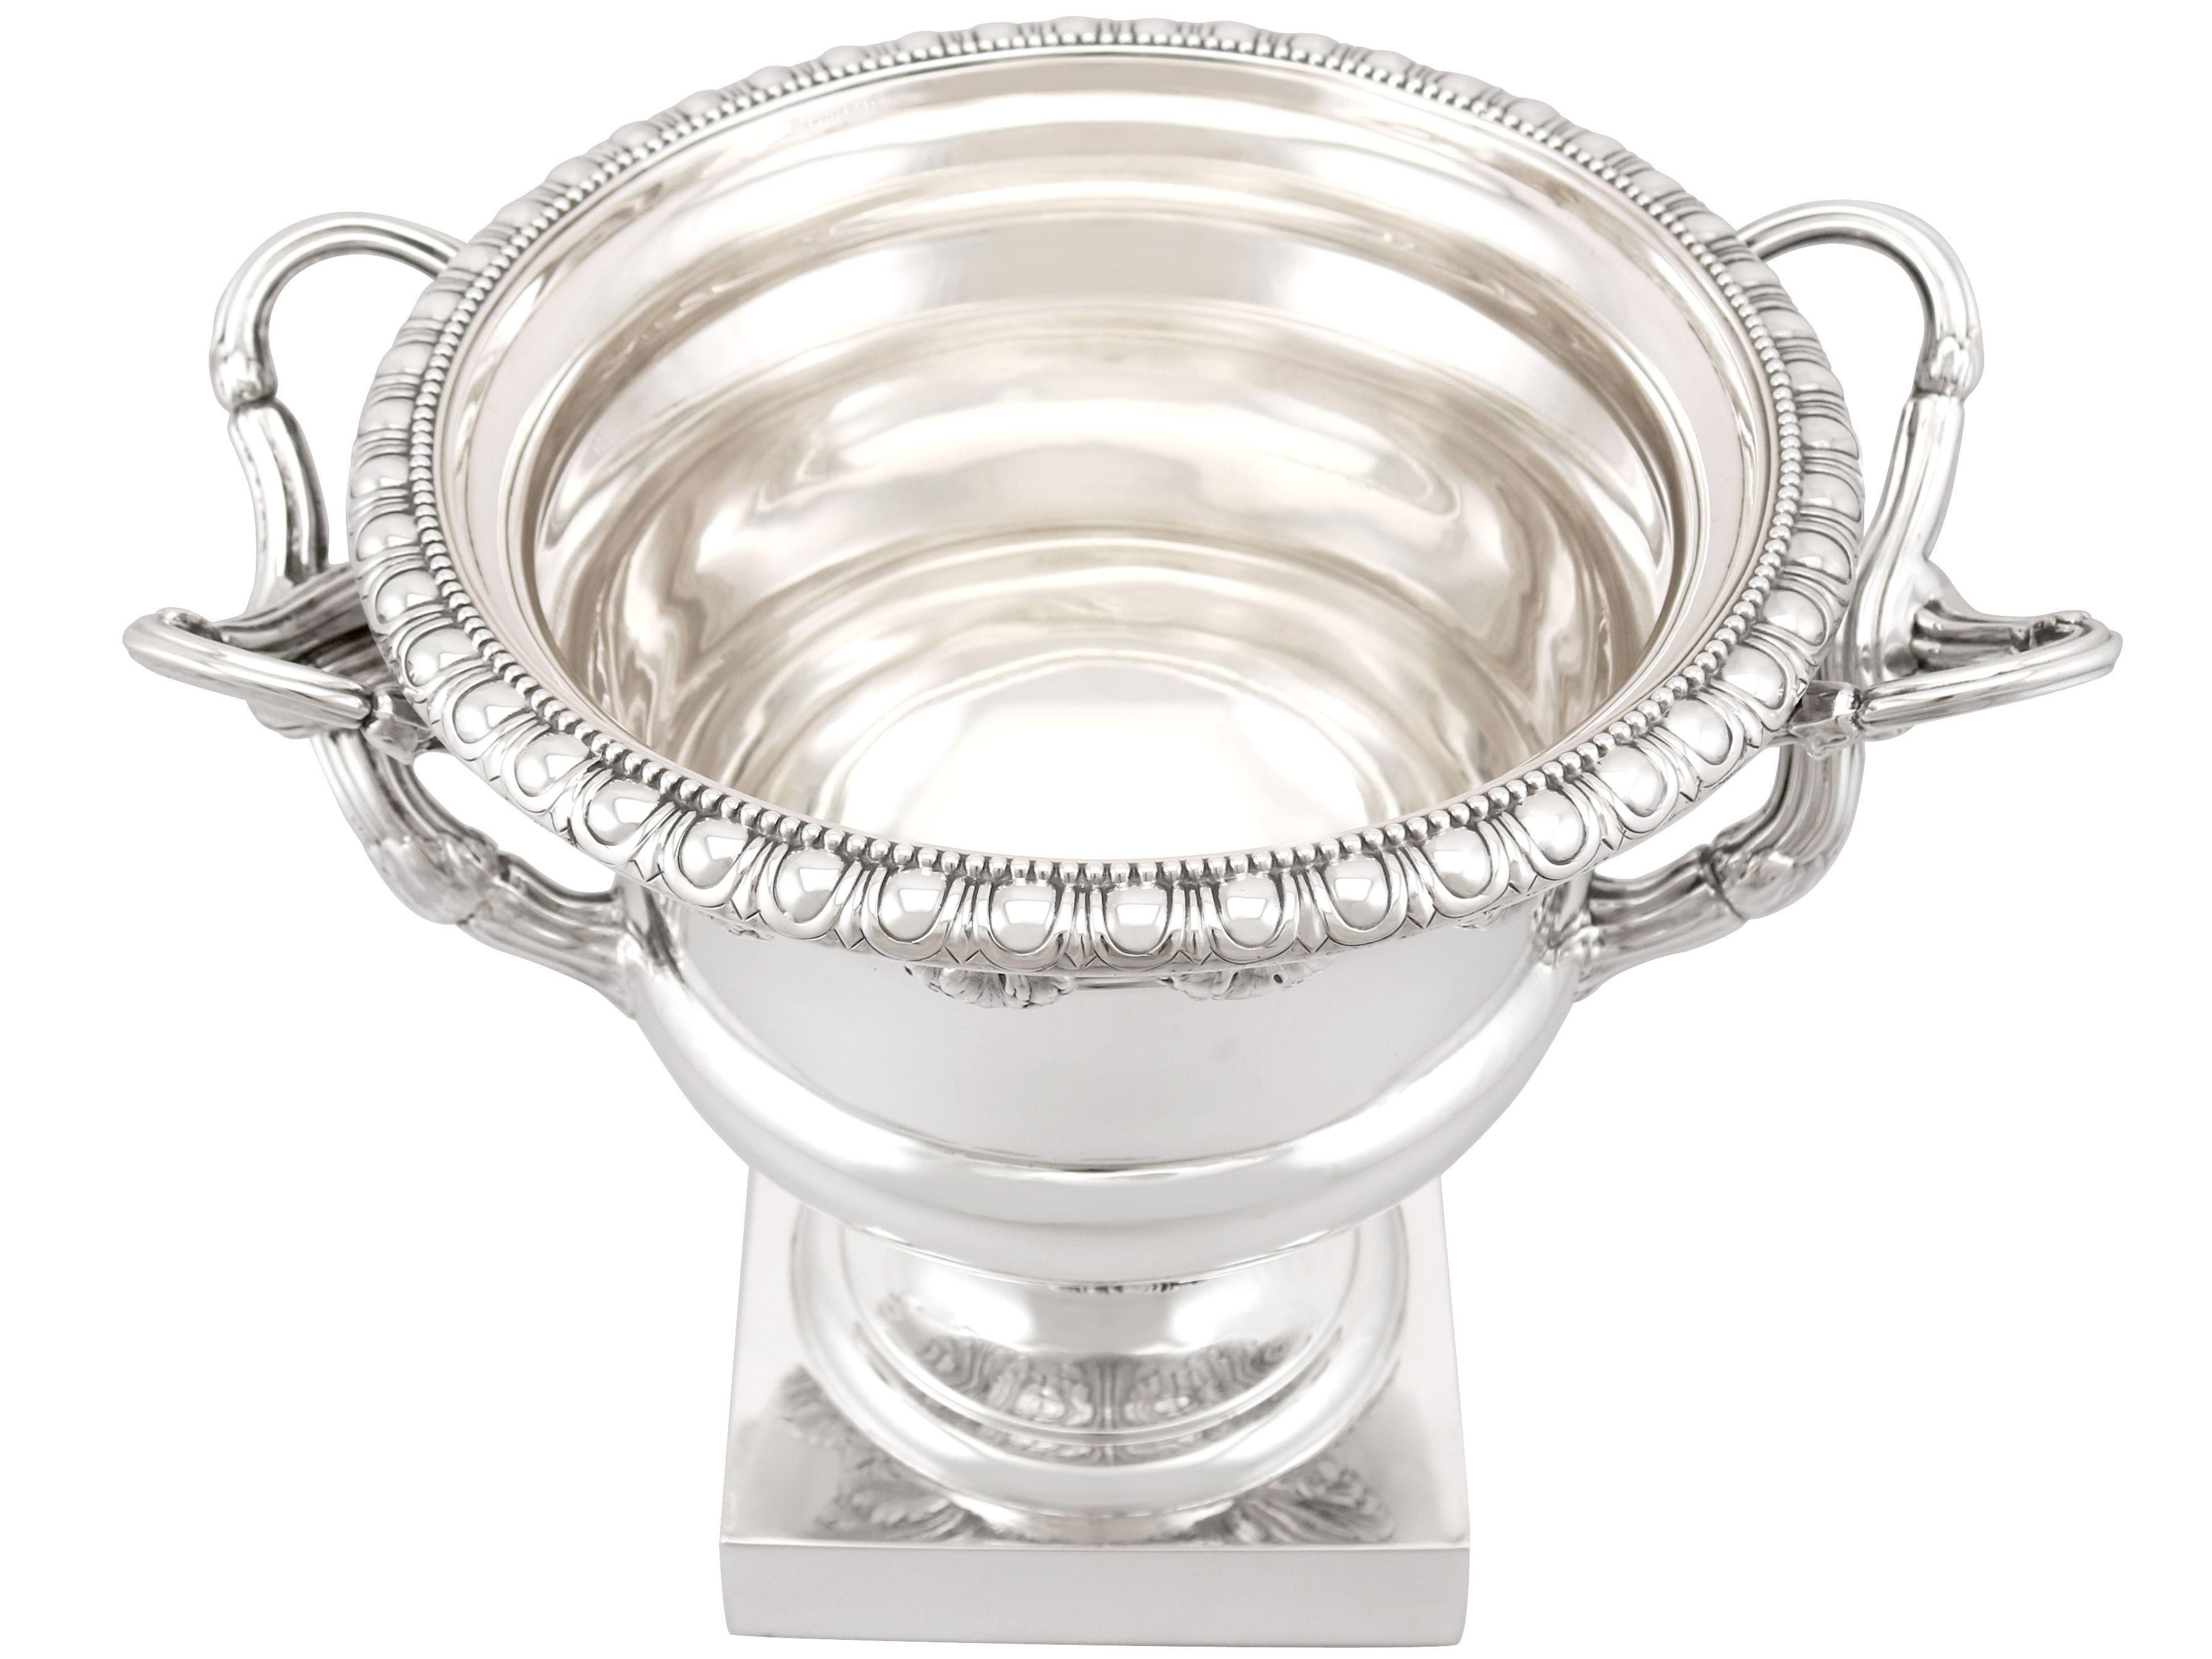 An exceptional, fine and impressive antique Edwardian English sterling silver Warwick style vase; an addition to our silver presentation collection

This exceptional antique Edwardian sterling silver Warwick style vase has a Campania shaped form